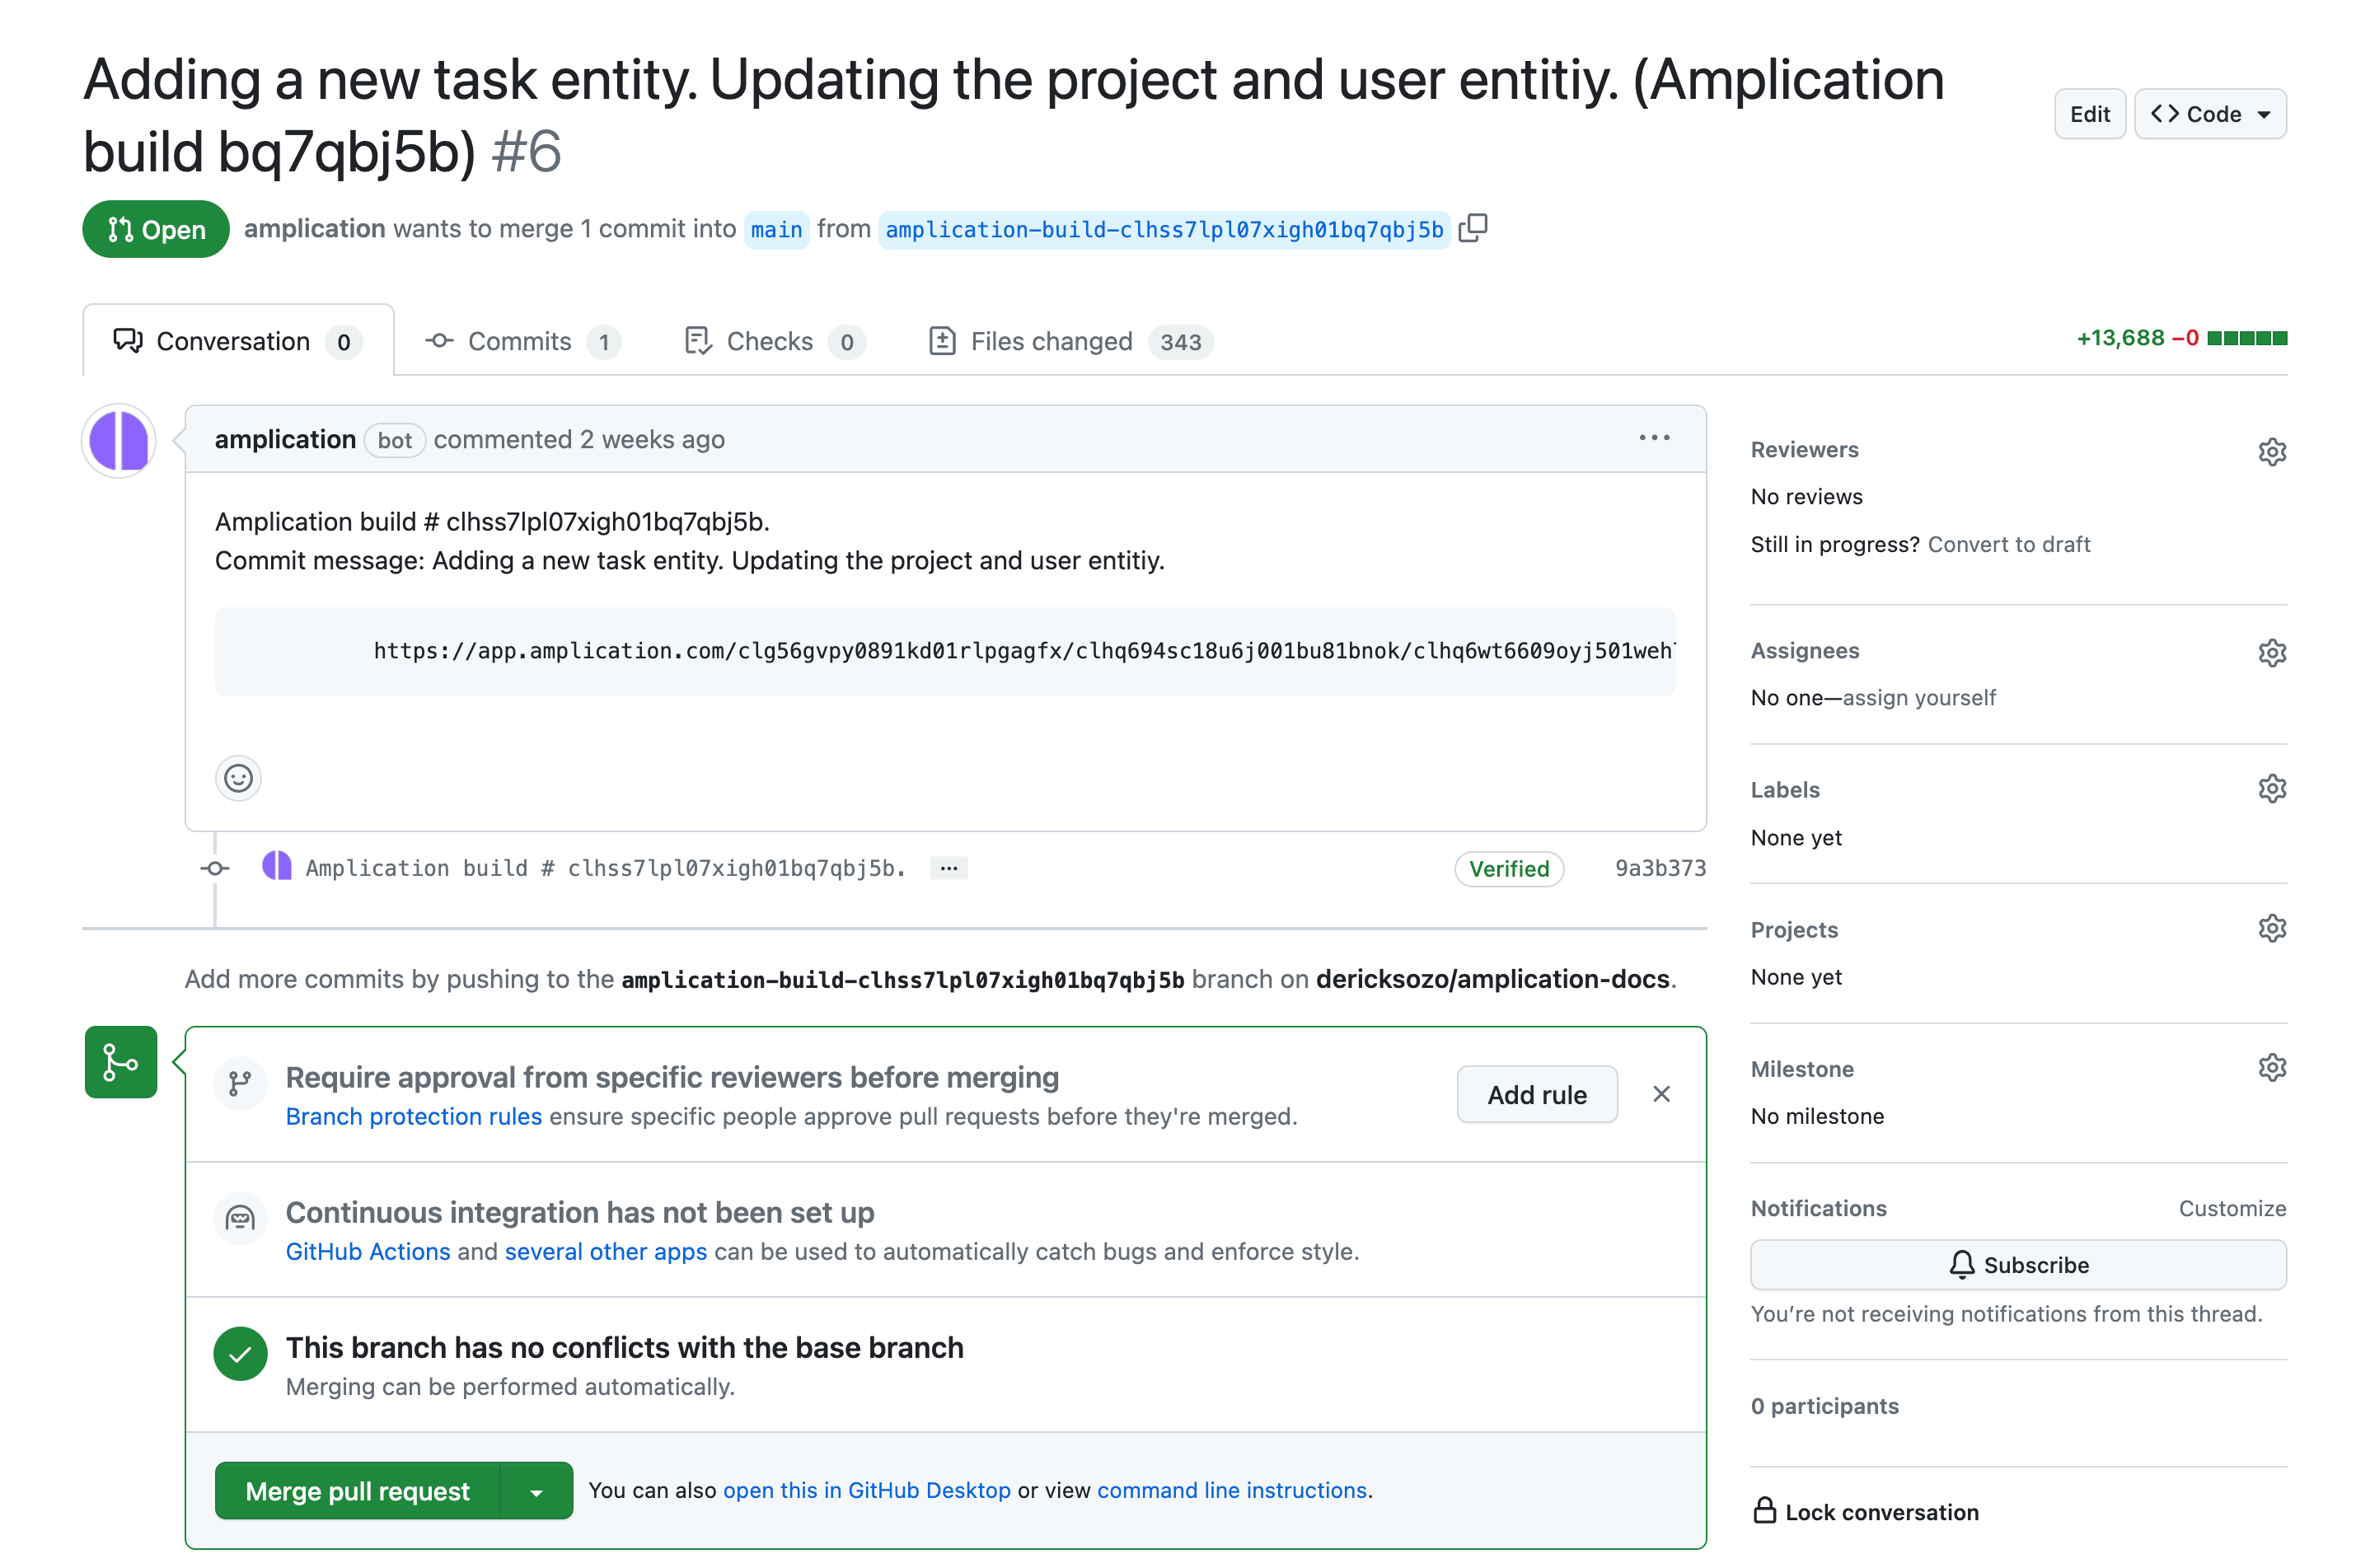 A pull request generated by Amplication on GitHub